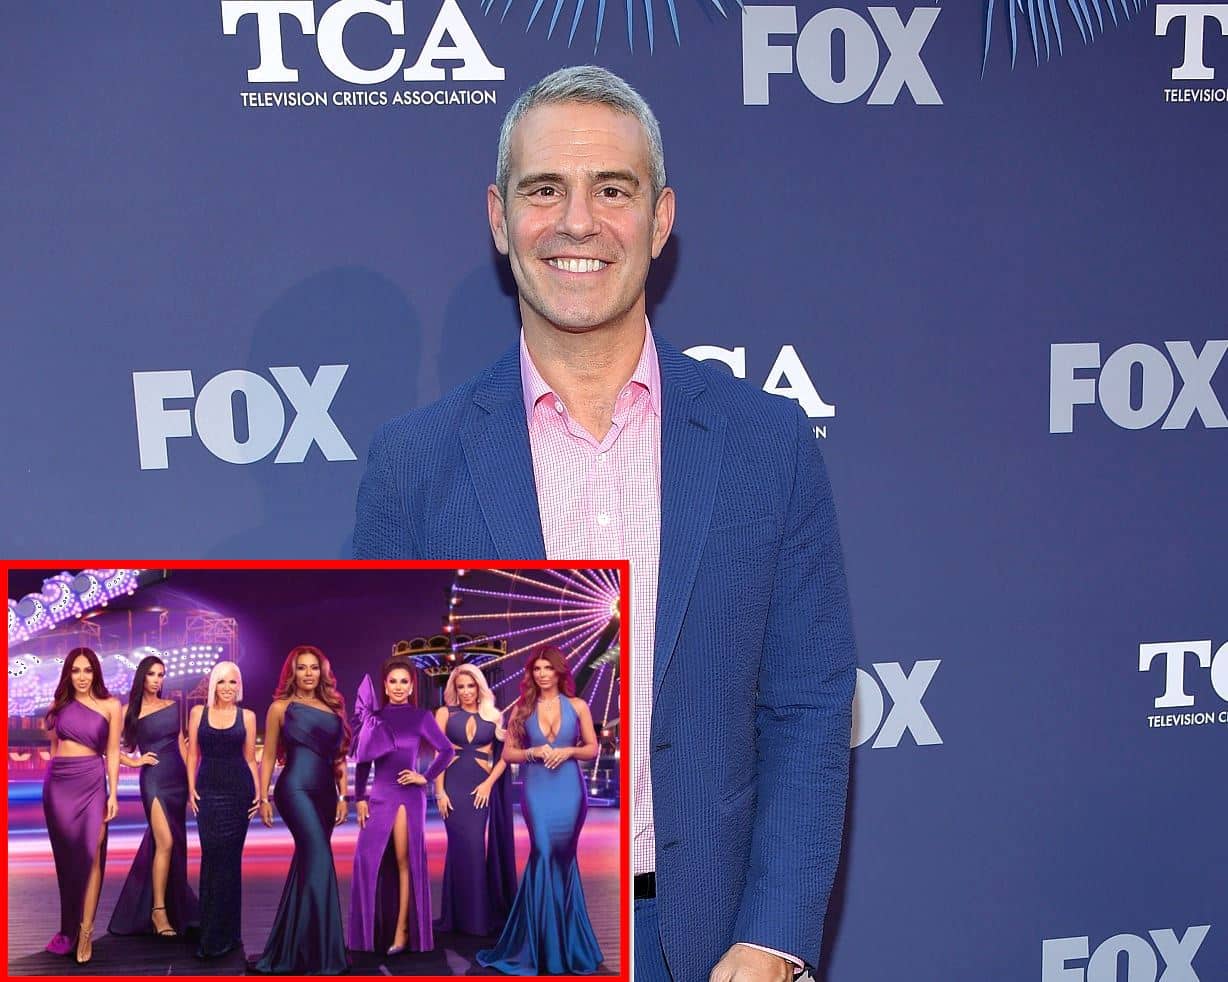 Andy Cohen Clarifies Comment About RHONJ Not Being "Sustainable" Amid Teresa and Melissa's Feud, Insists Season 14 "Worked" and Talks Jax and Brittany's Split